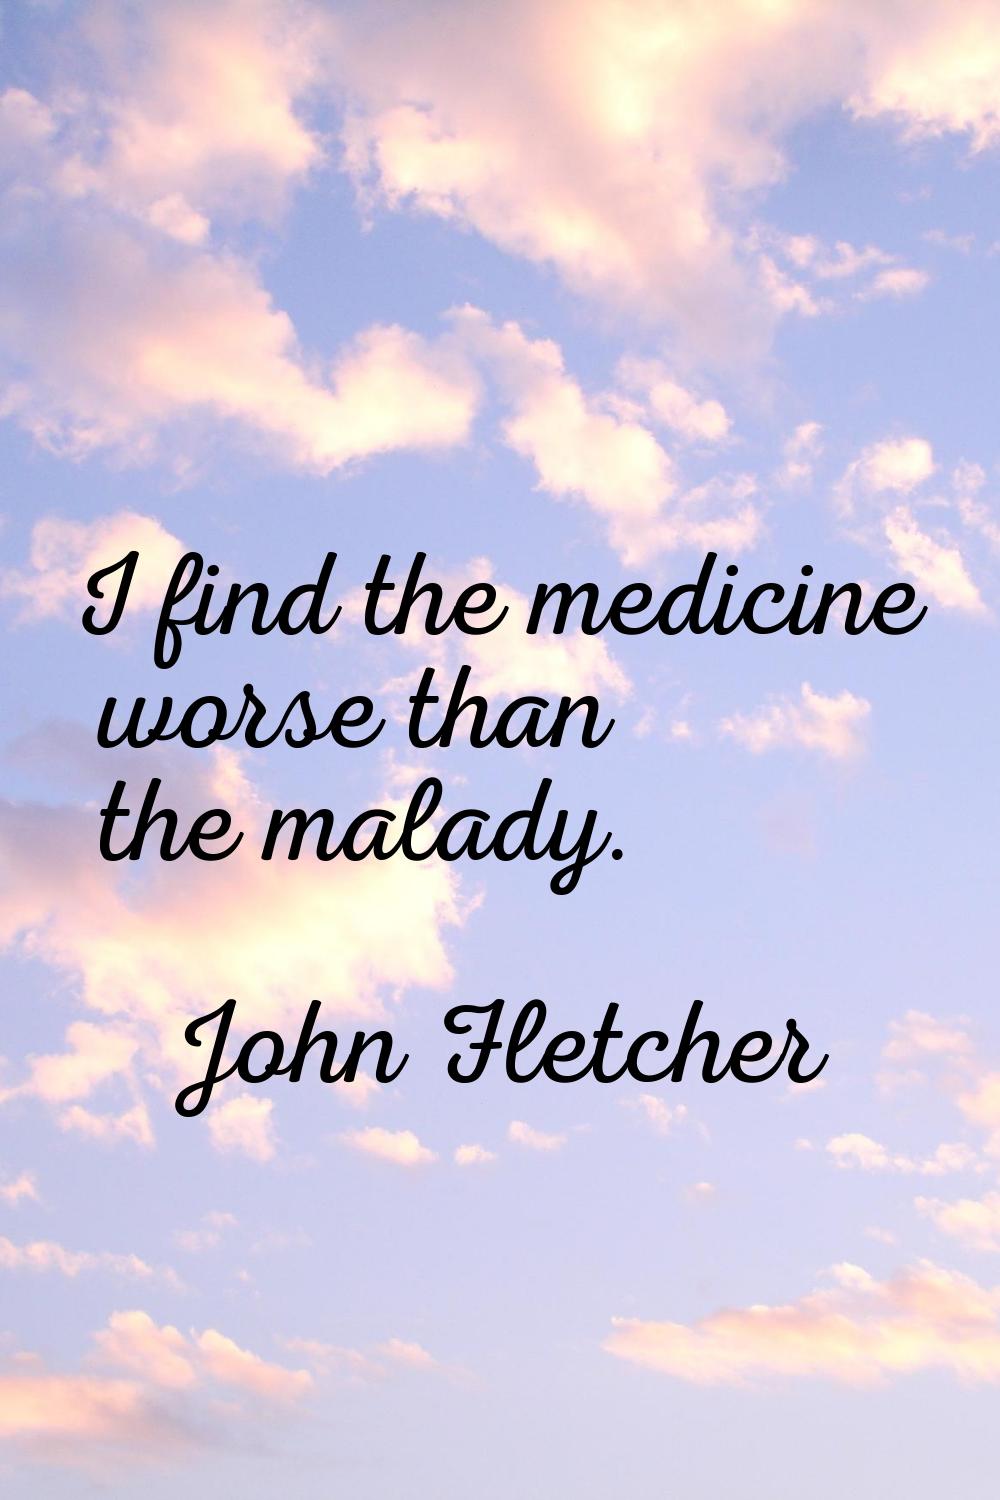 I find the medicine worse than the malady.